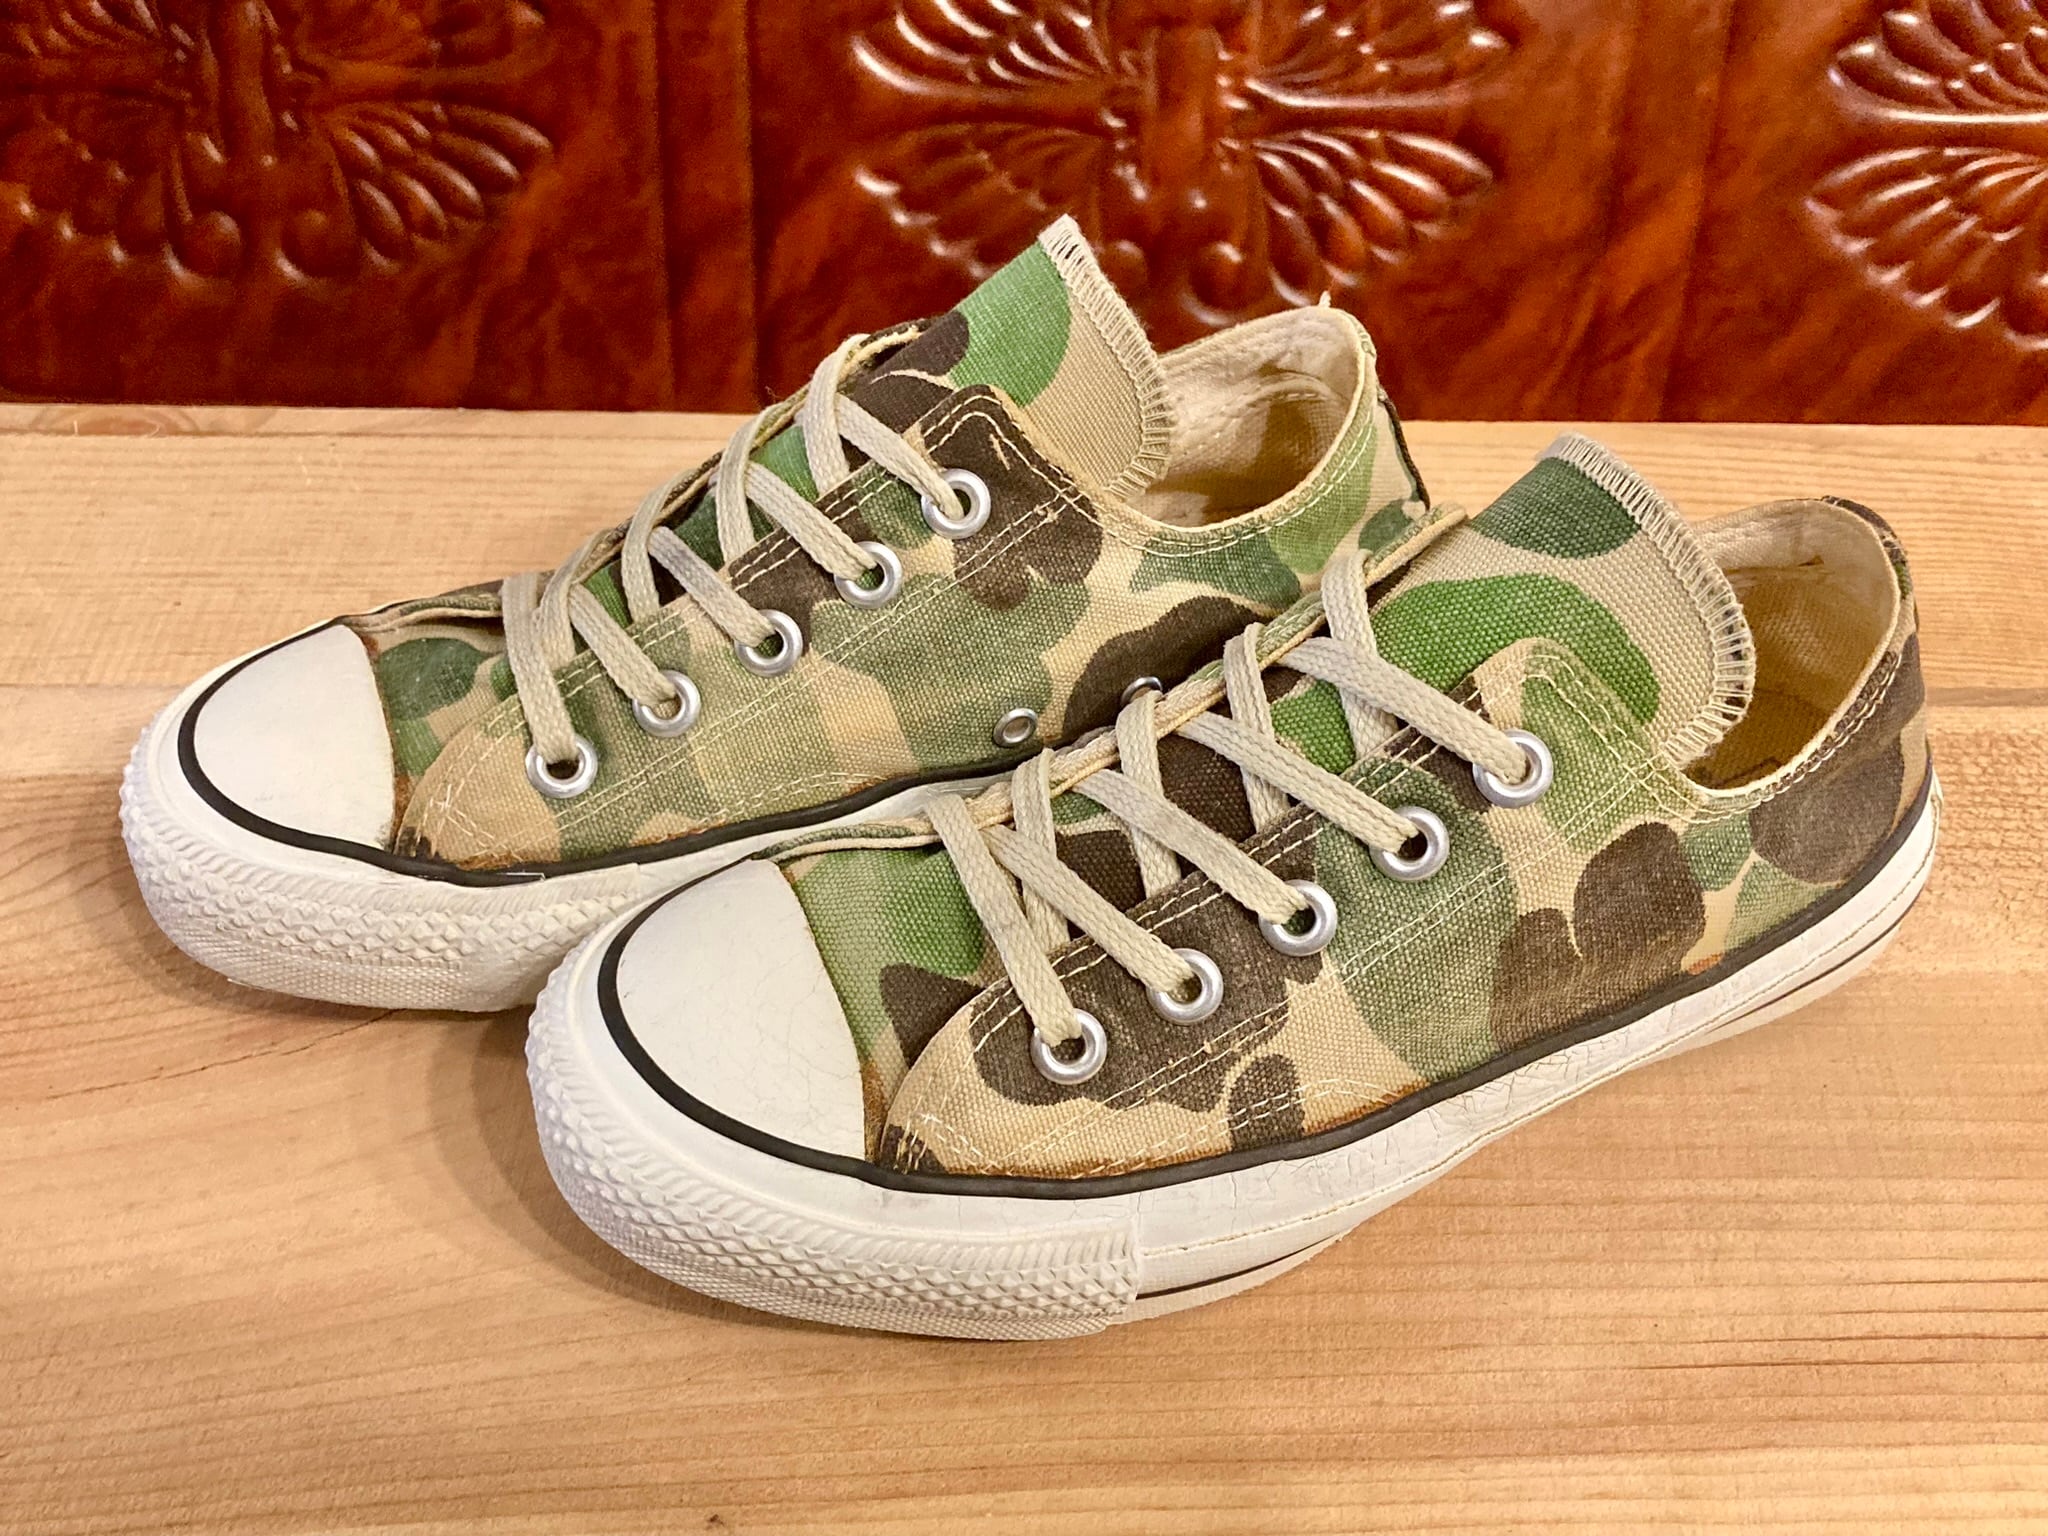 converse（コンバース） ALL STAR CAMOUFLAGE（オールスターカモフラ ） 83カモ 迷彩柄 4 23cm 80s USA  237 | freestars powered by BASE